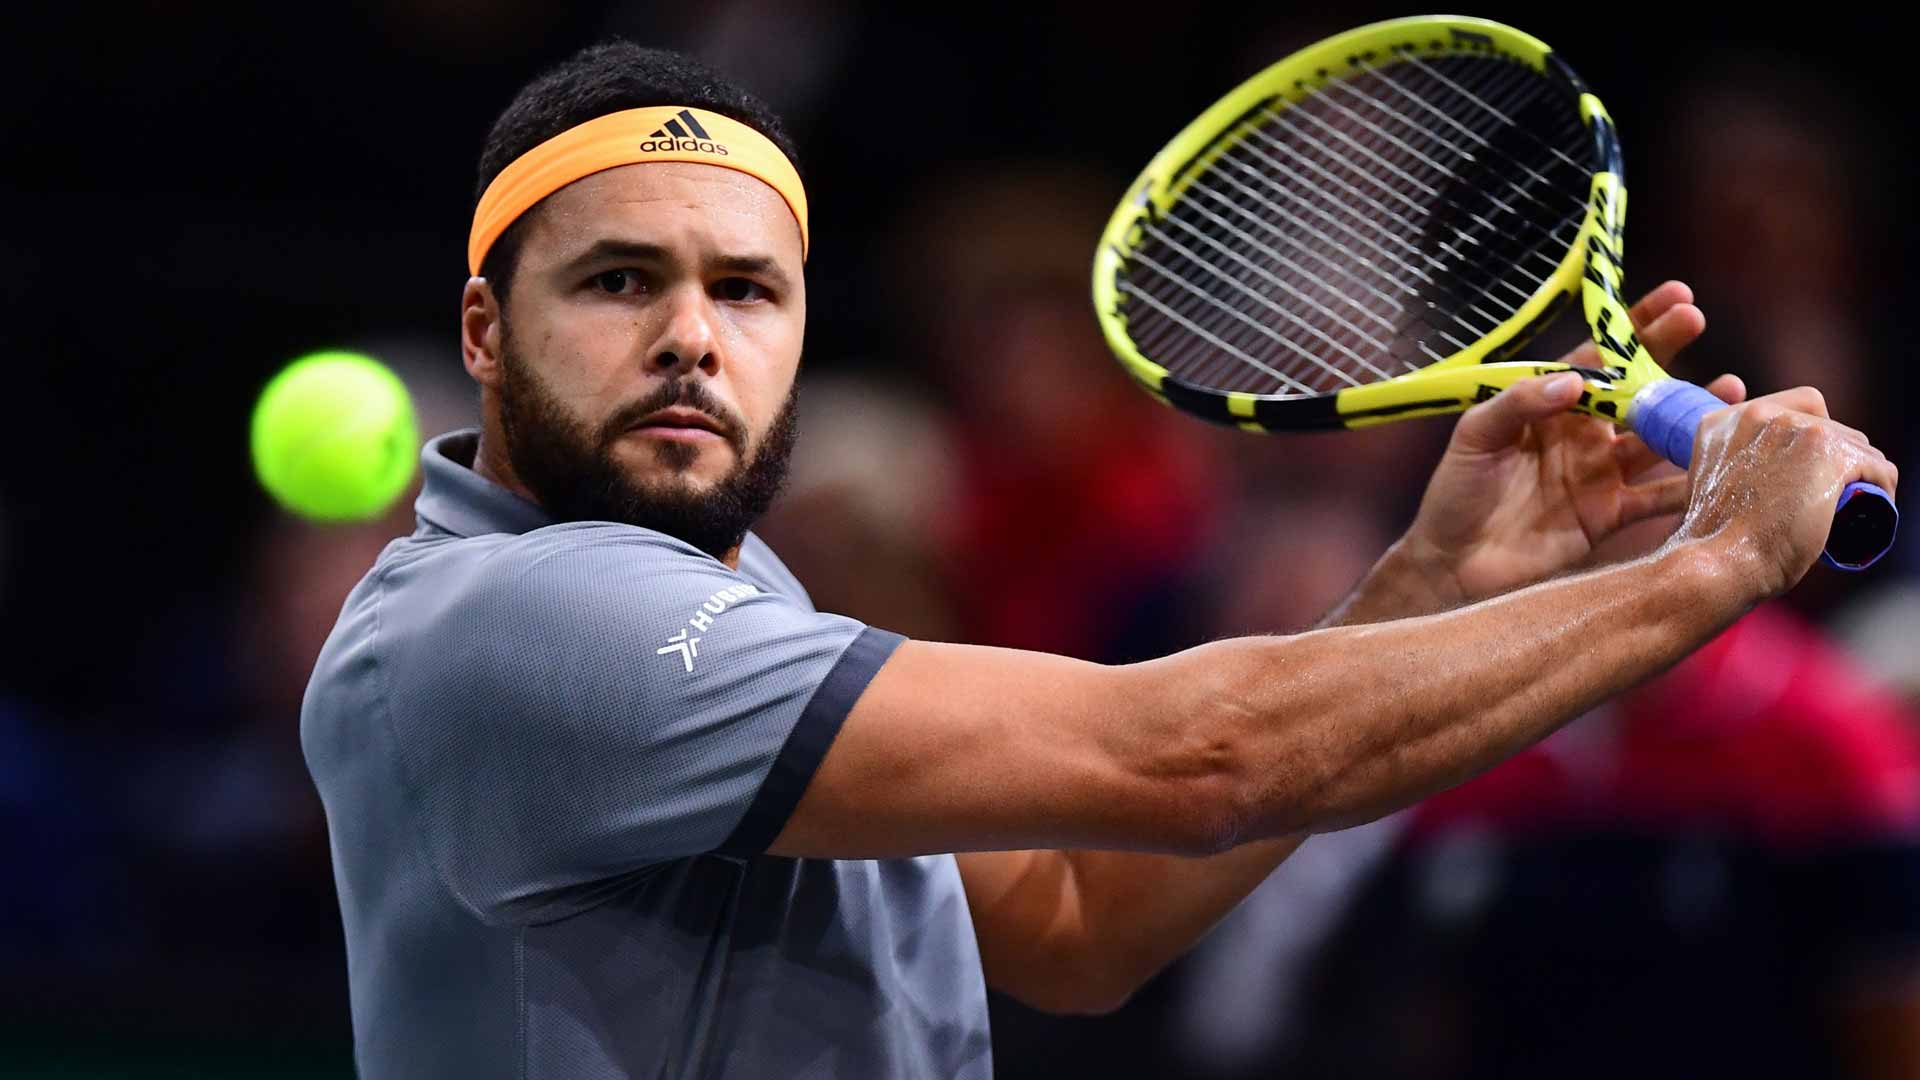 Jo-Wilfried Tsonga owns the biggest jump to the Top 50 of the ATP Rankings this year, in his return from knee surgery.